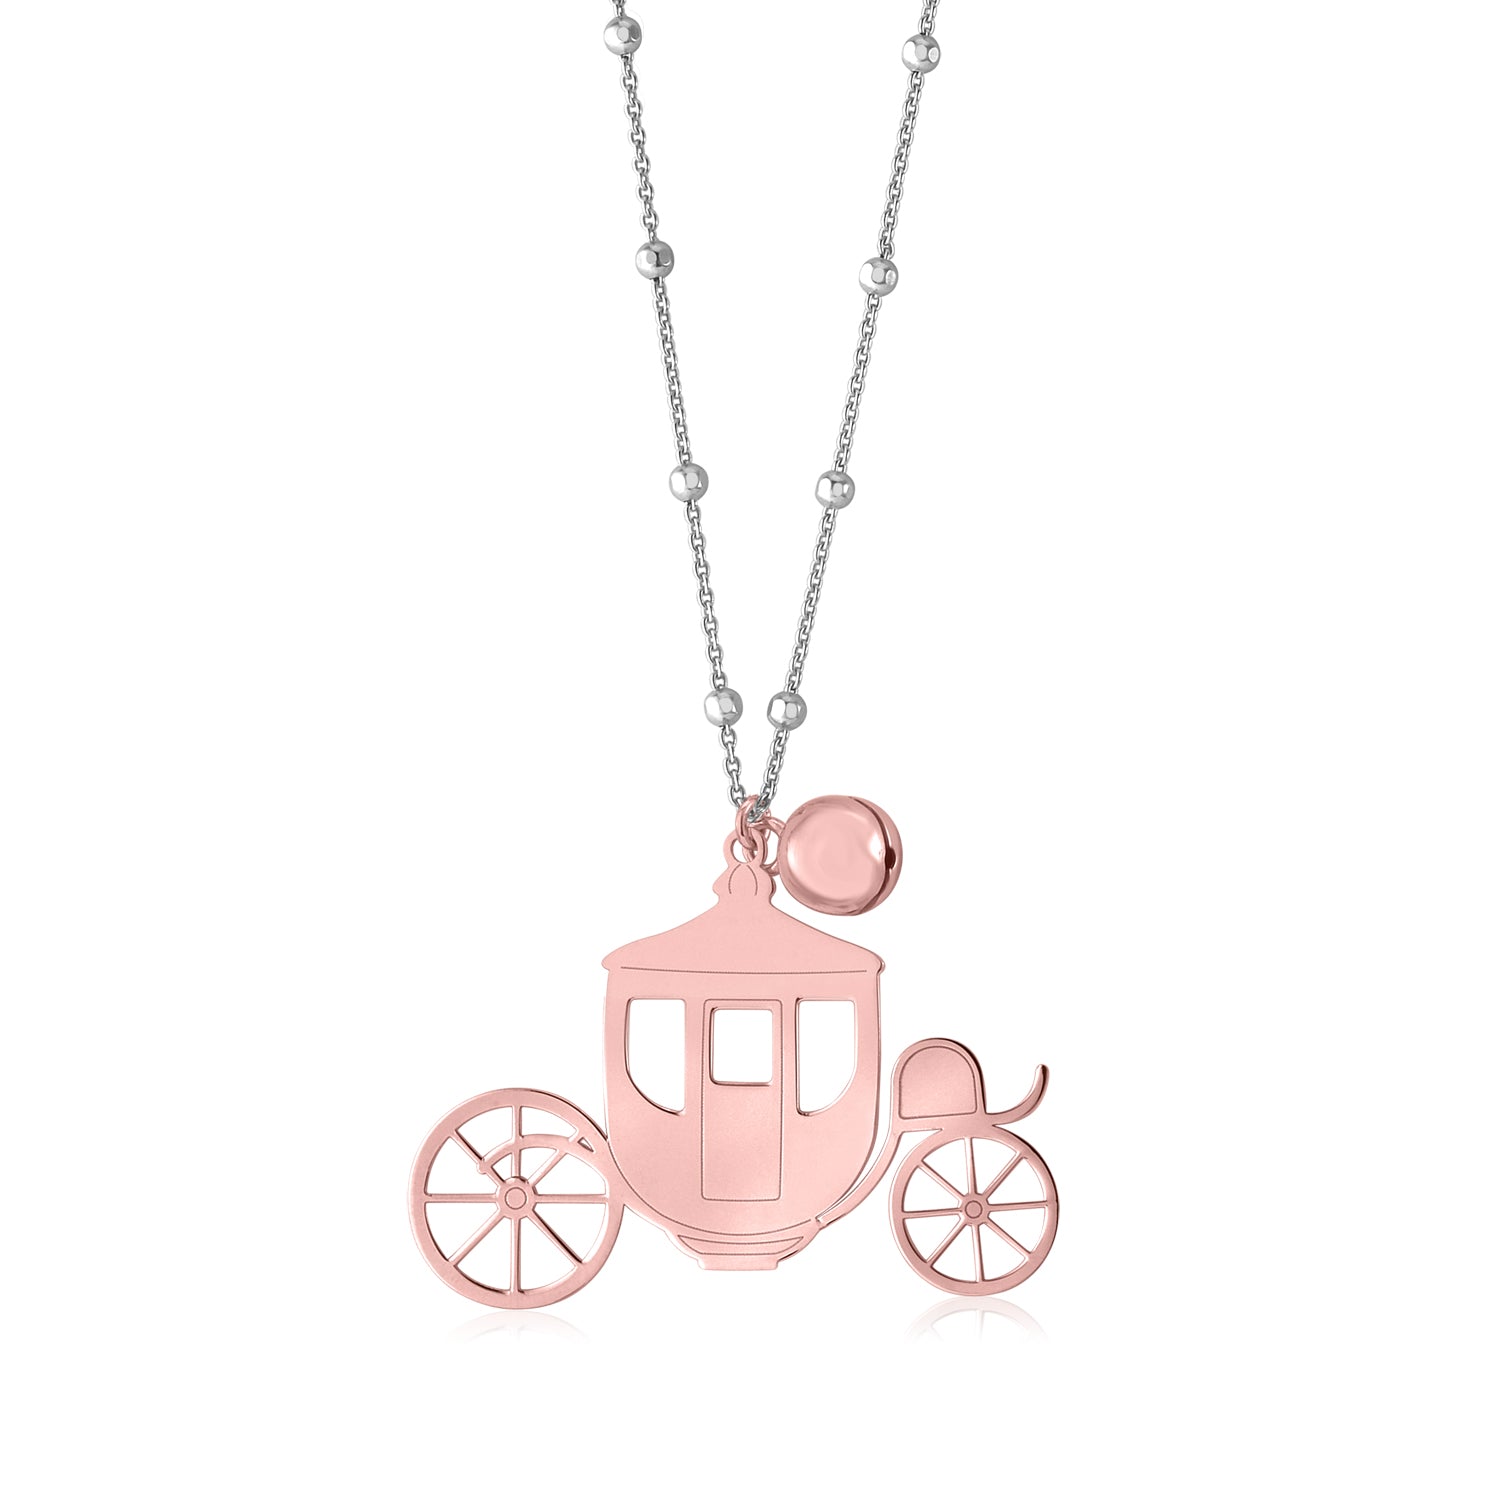 Sterling Silver High Polished Large Fantasy Carriage Coach Rose Gold Pendant Necklace Long Cable Chain 30"